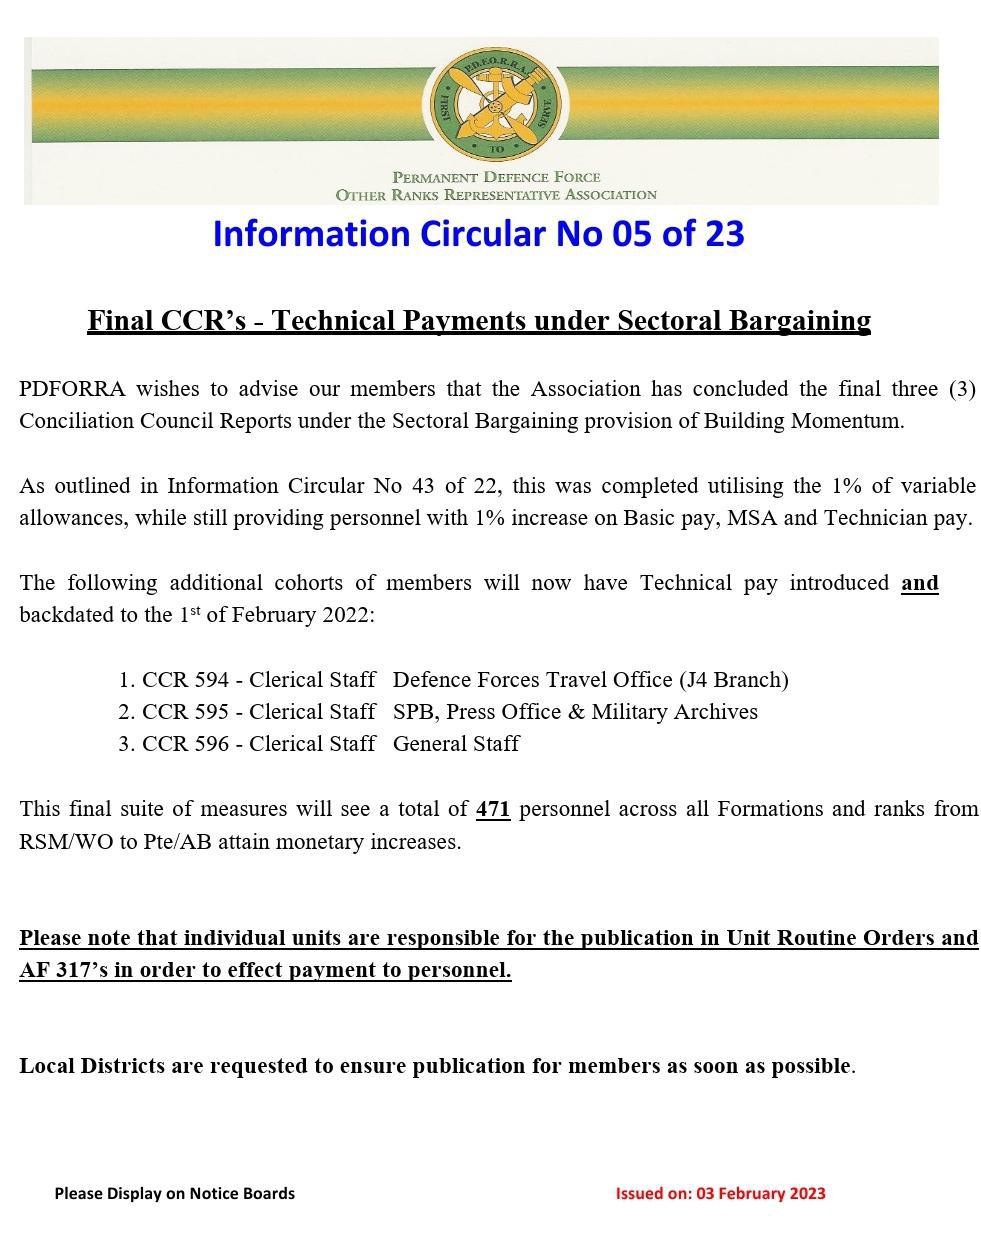 Information Circular No 05 of 23 - Final CCR's - Technical Payments under Sectoral Bargaining